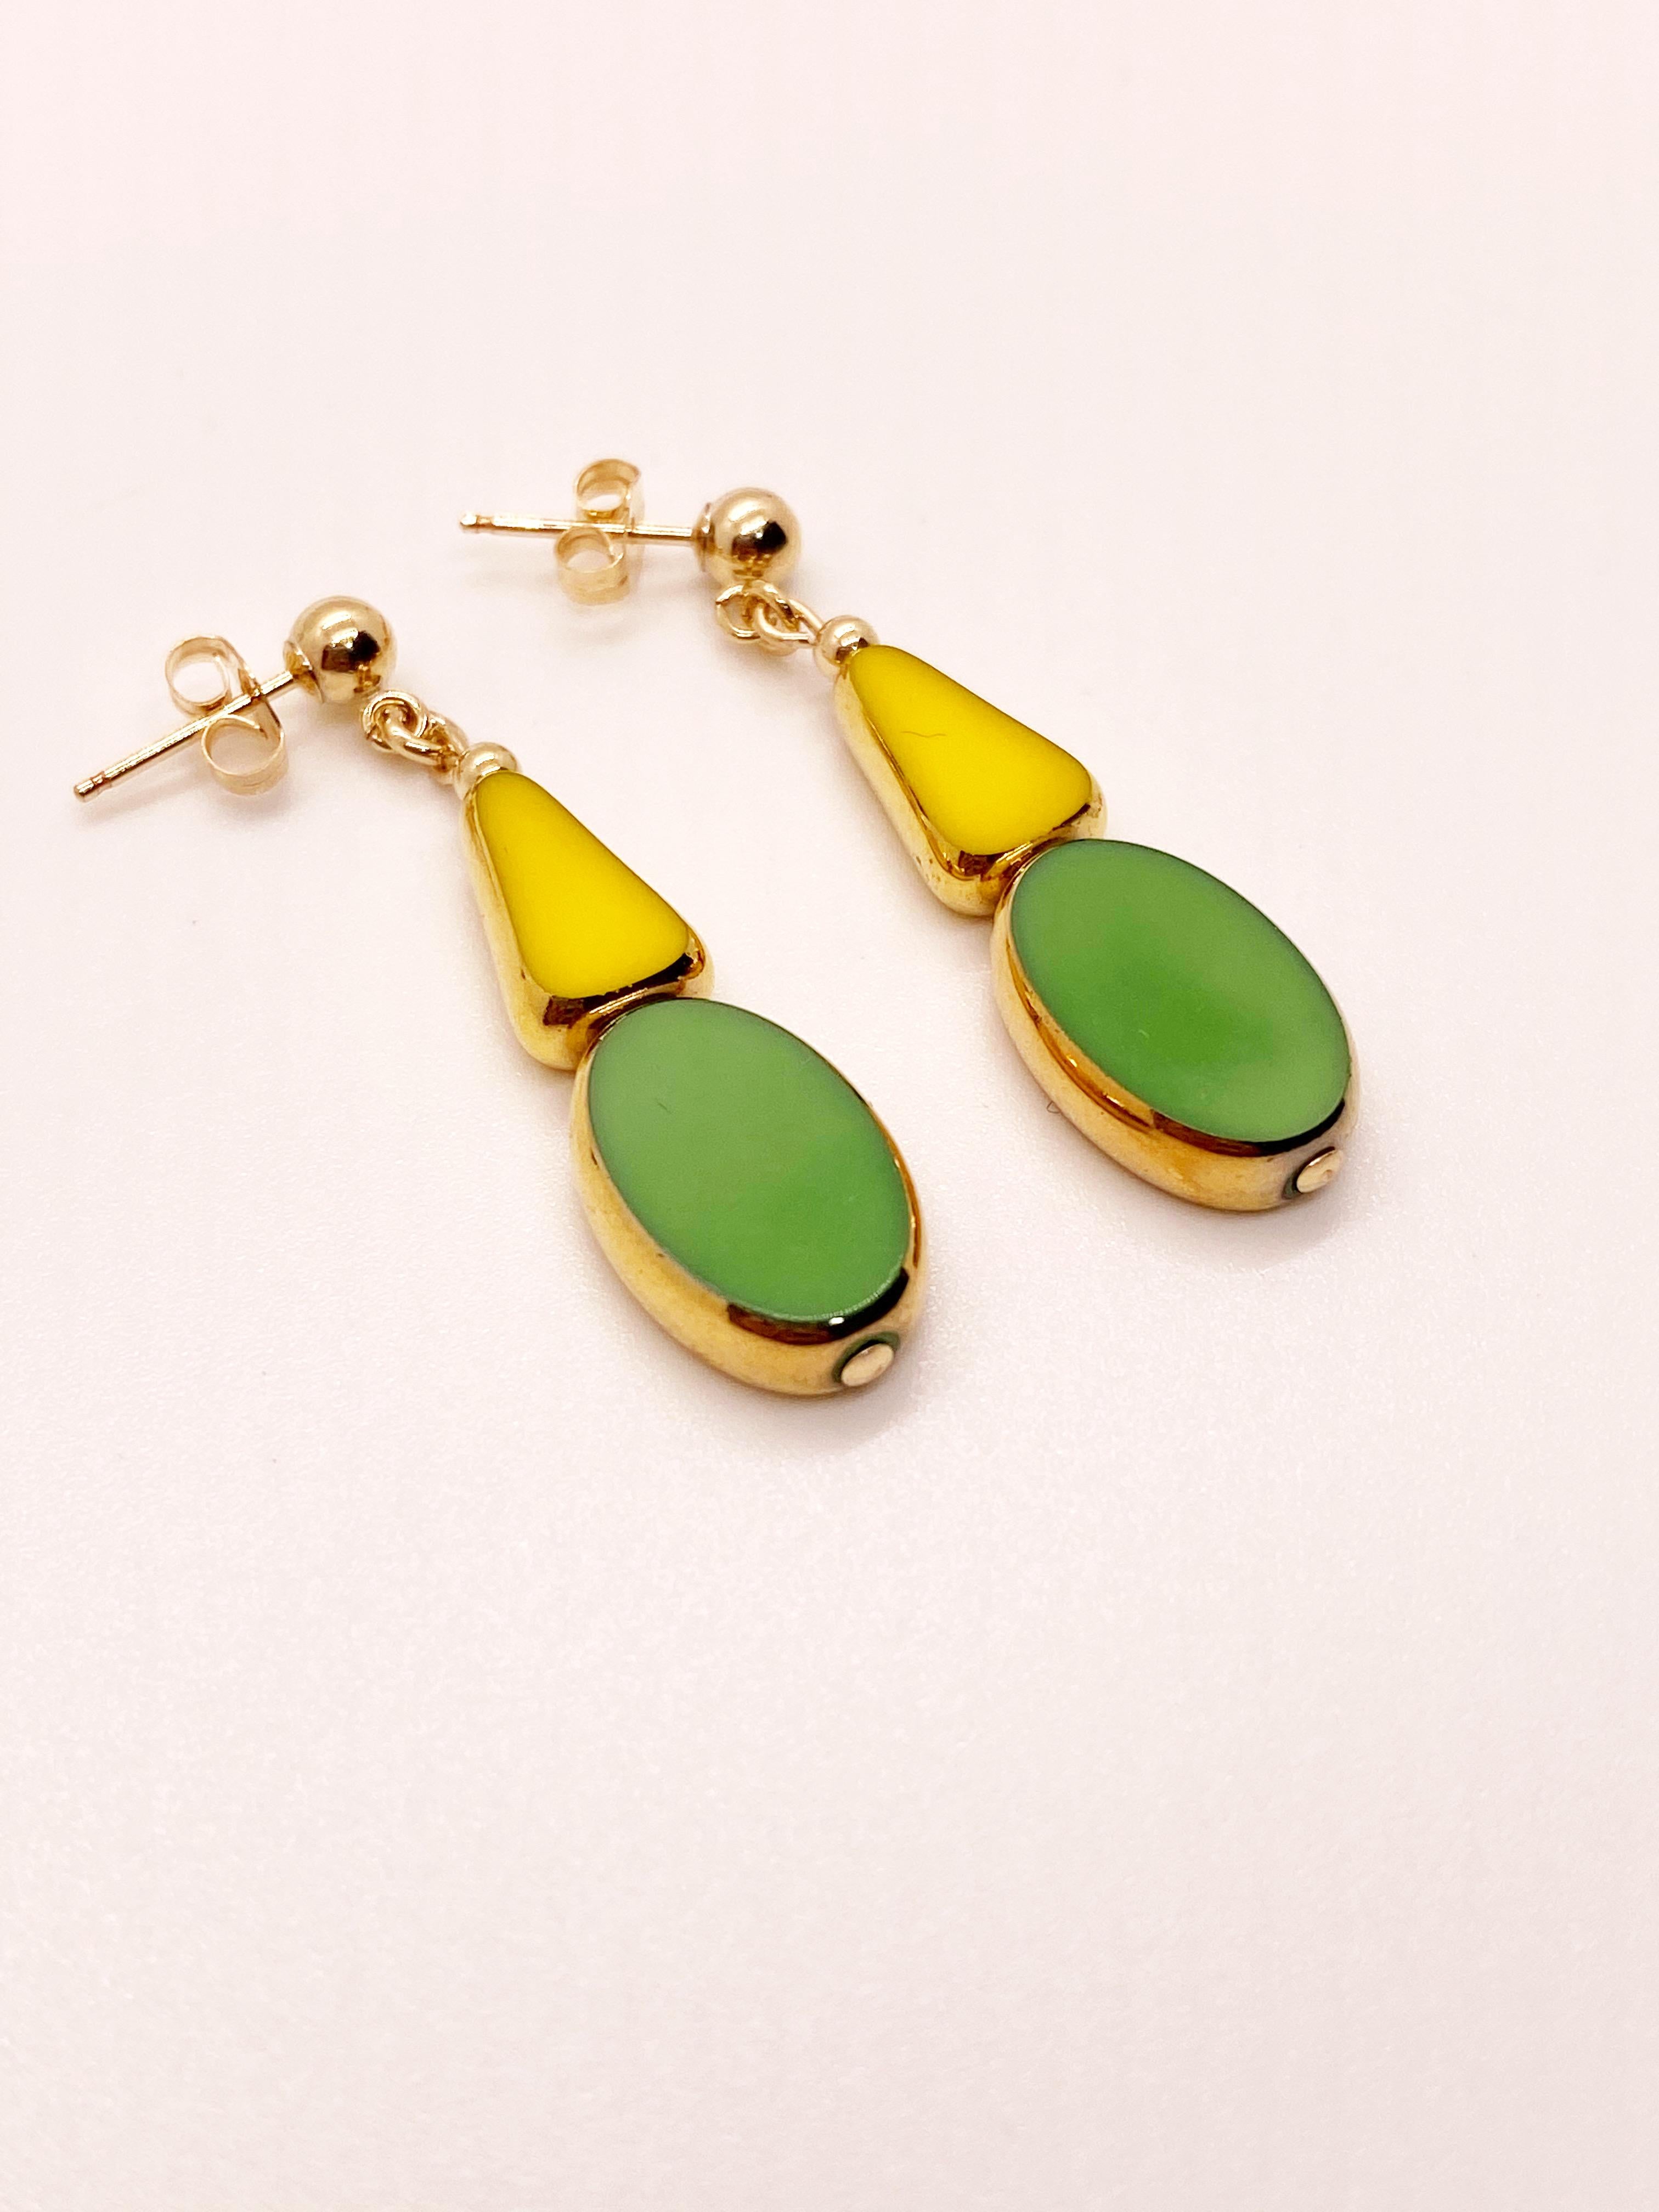 Bright and bold, yellow and green colored German vintage glass beads edged with 24K gold dangles on a 4mm ball 14K gold filled earring post. 

The German vintage glass beads are considered rare and collectible, circa 1920s-1960s.

*Our jewelry have